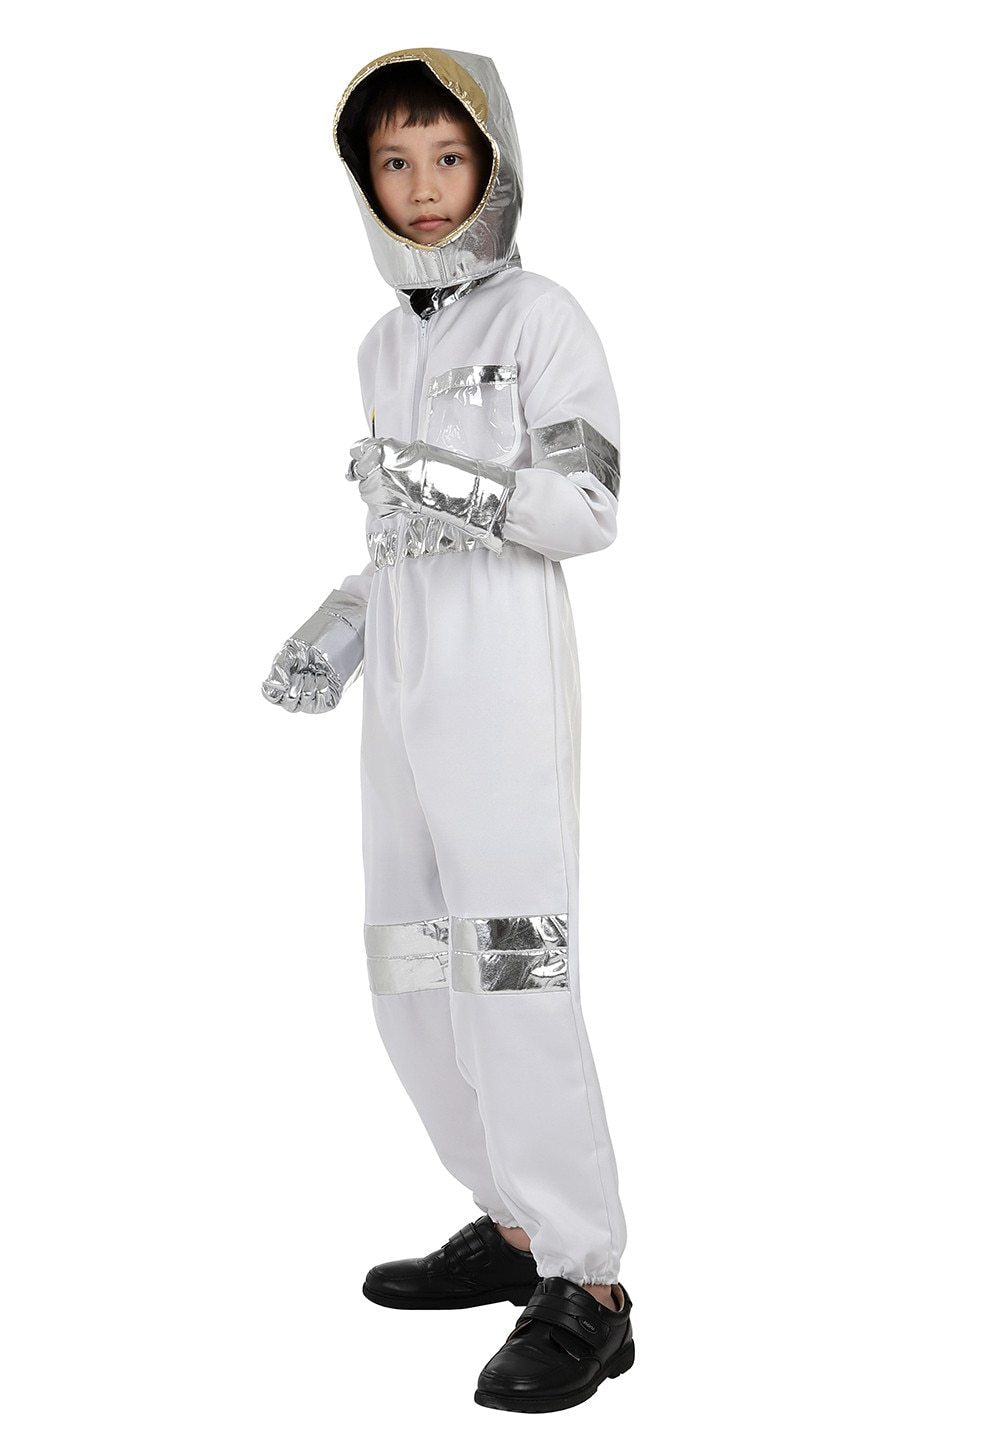 Super Cool Space NASA SpaceX Jumpsuits for Children (Halloween)